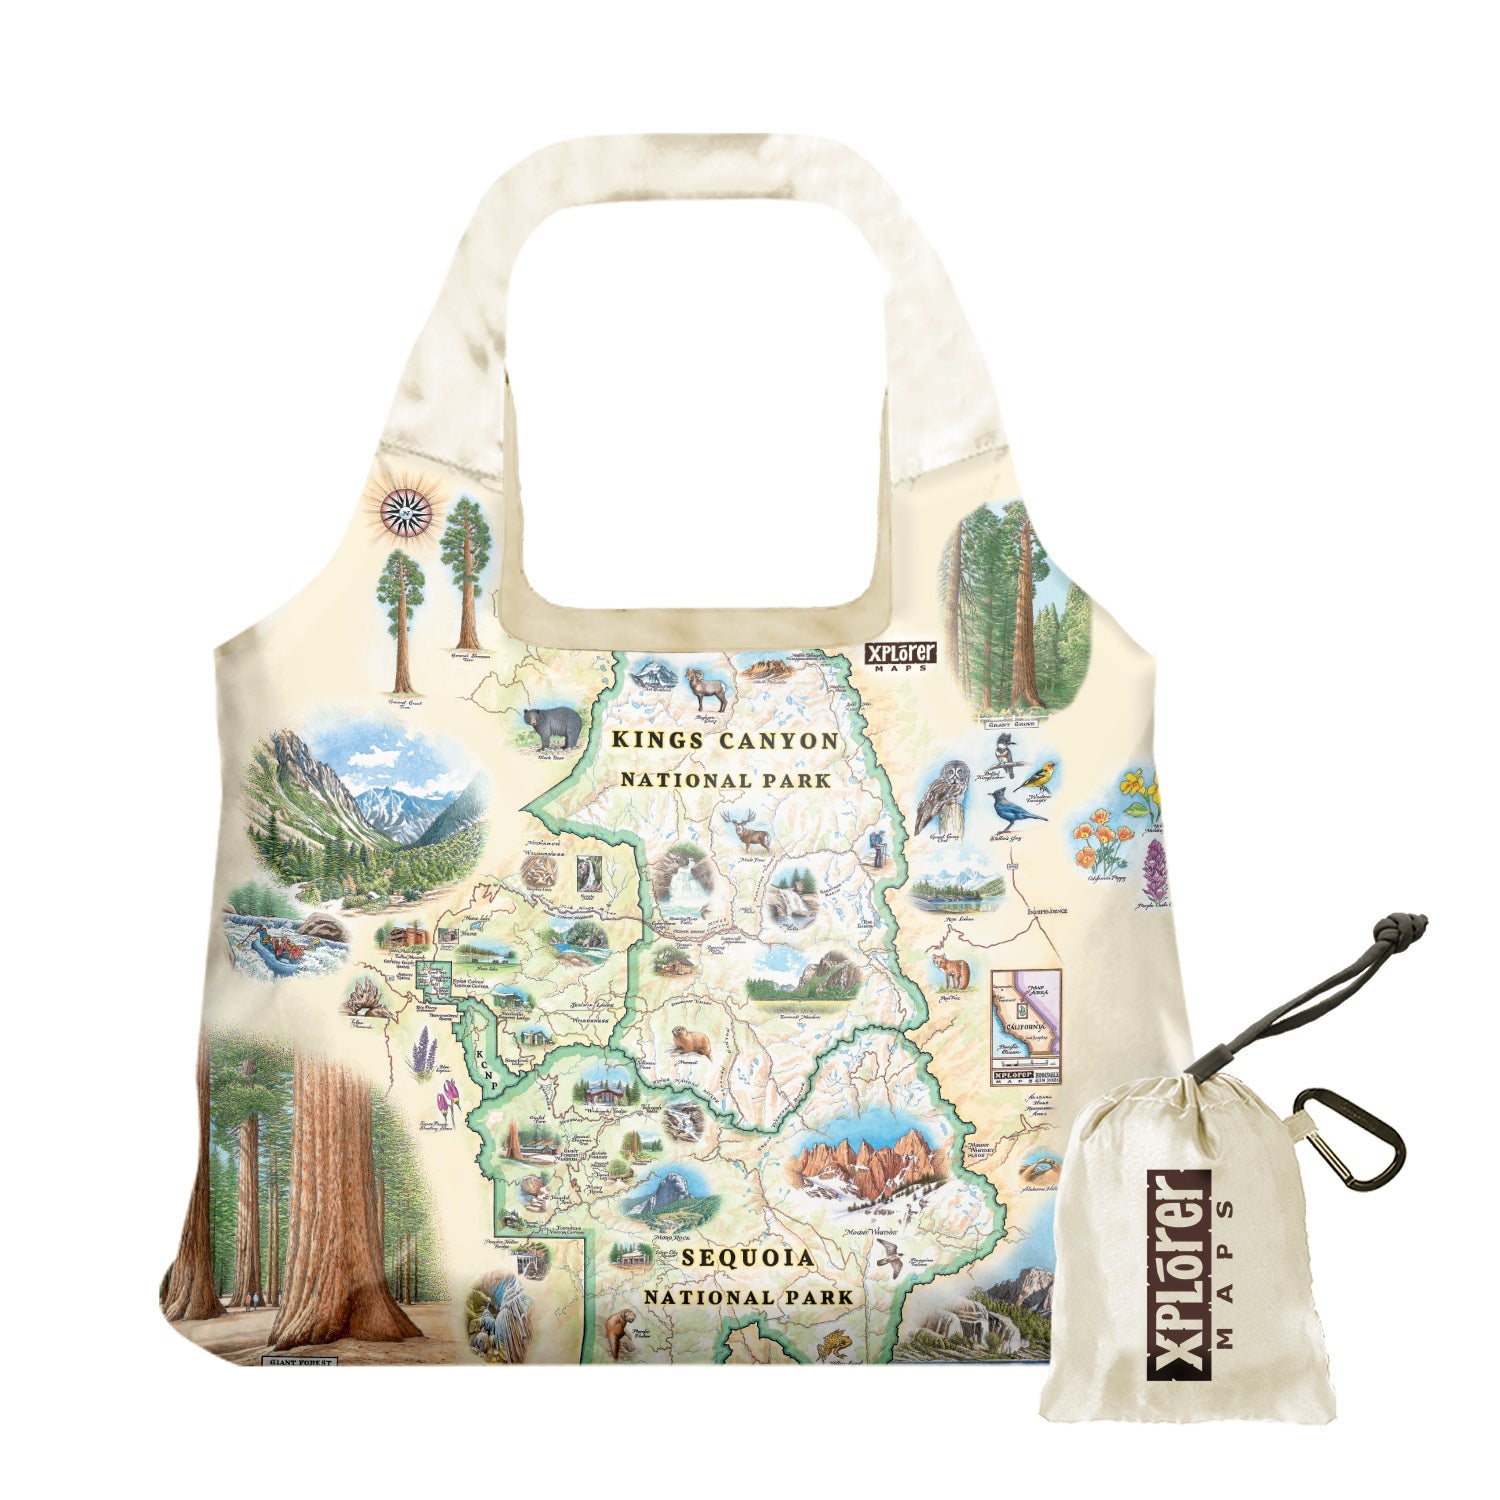 Sequoia & Kings Canyon National Parks Map Pouch Tote Bags by Xplorer Maps. The map features illustrations of the Giant Forest, Mount Whitney, and the John Muir Lodge. Flora and fauna include mule deer, red fox, Sierra Purple shooting star flowers, and California poppy.